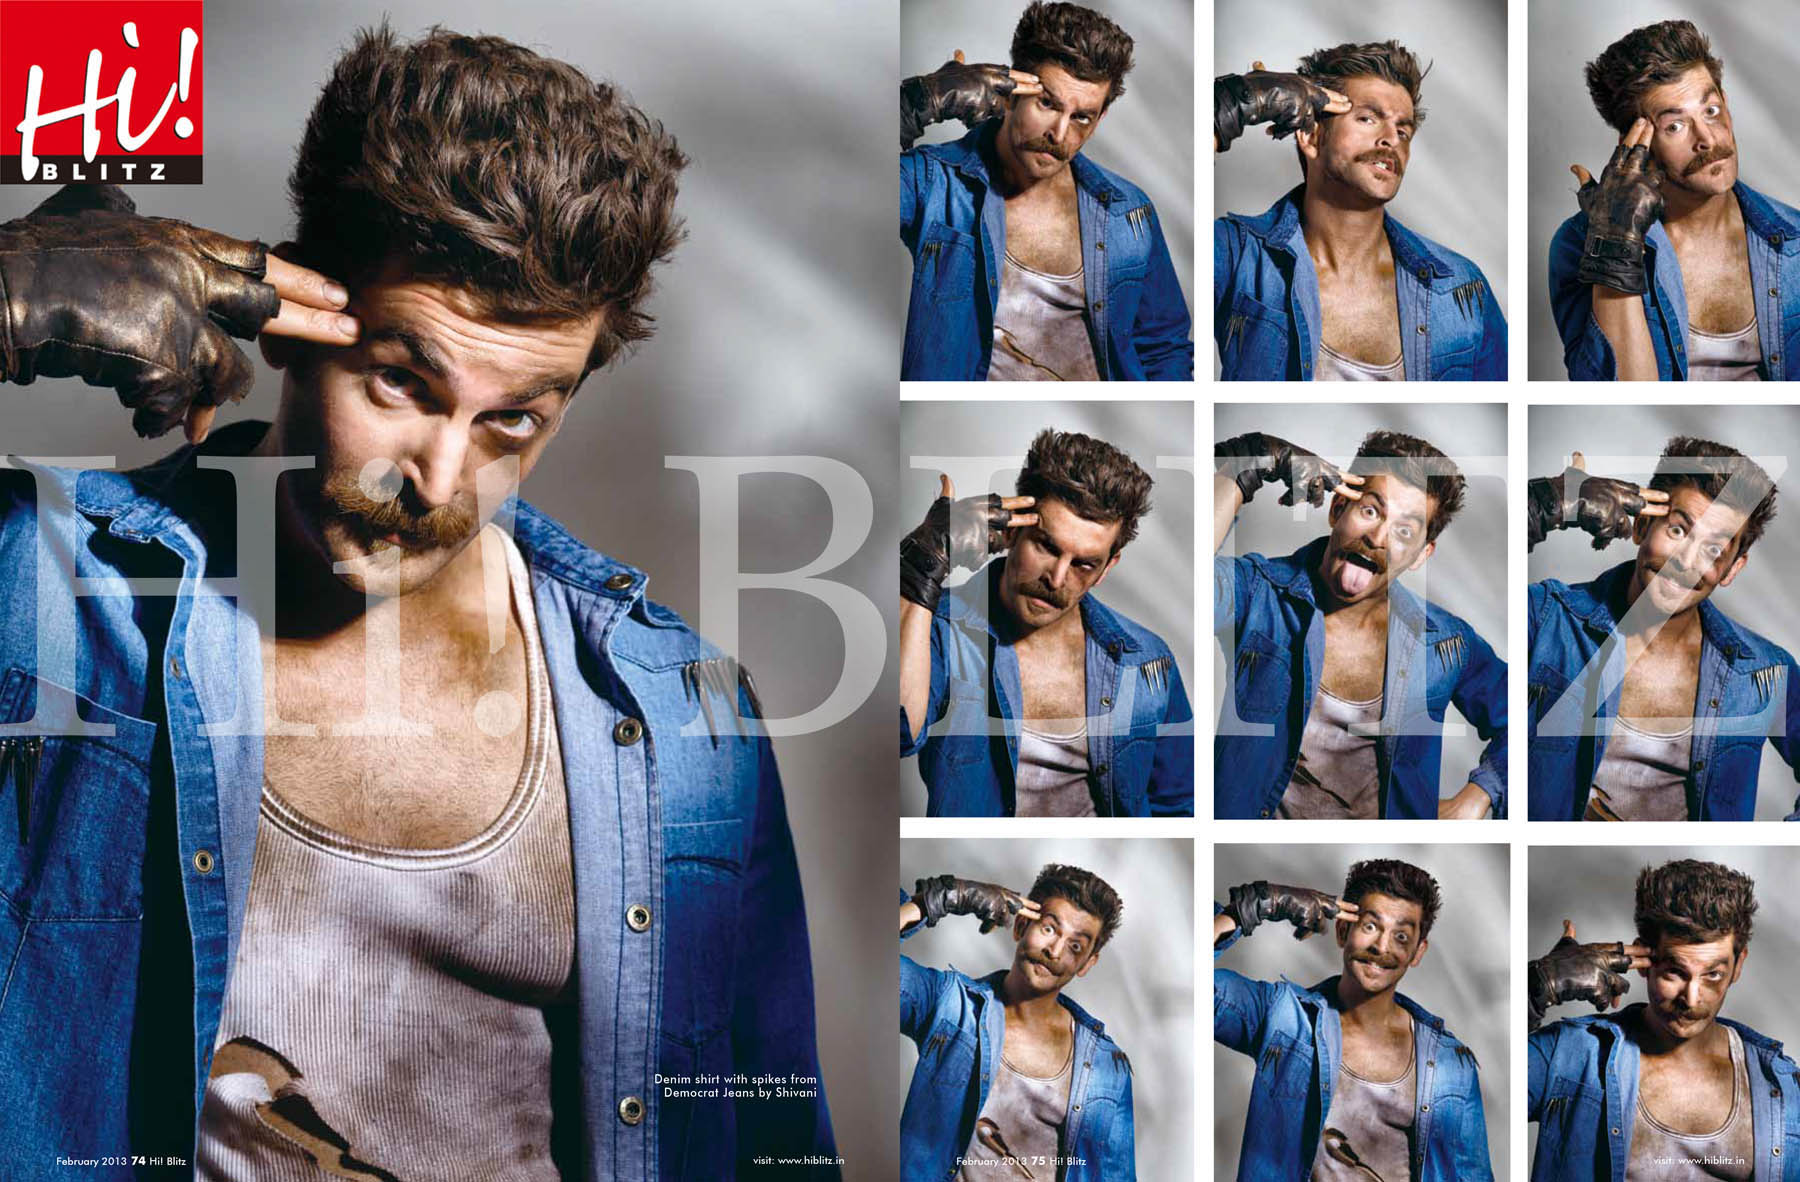 Best Bollywood Photographer in India Vikram Bawa, Actor Neil Nitin Mukesh for Hi Blitz magazine, Editorial, Actors life, Bollywood, Shooting with Star, Style, Published Photographer, Celebrity Photoshoot, Best Editorial Photographer by Vikram Bawa, Best Fashion Photographer  Vikram Bawa, Mumbai, India